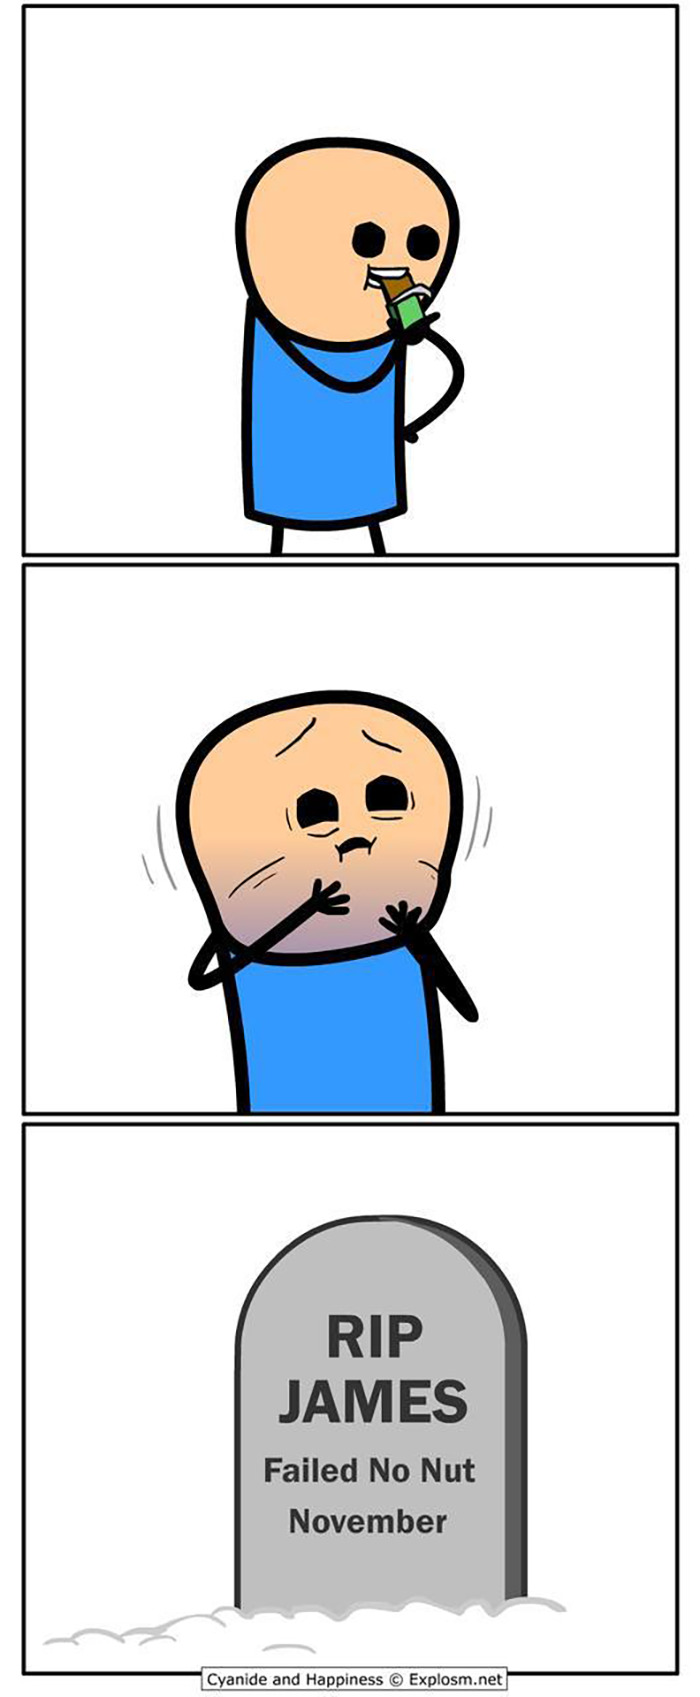 New Cyanide And Happiness Comics Full Of Dark Humor And Clever Punchlines